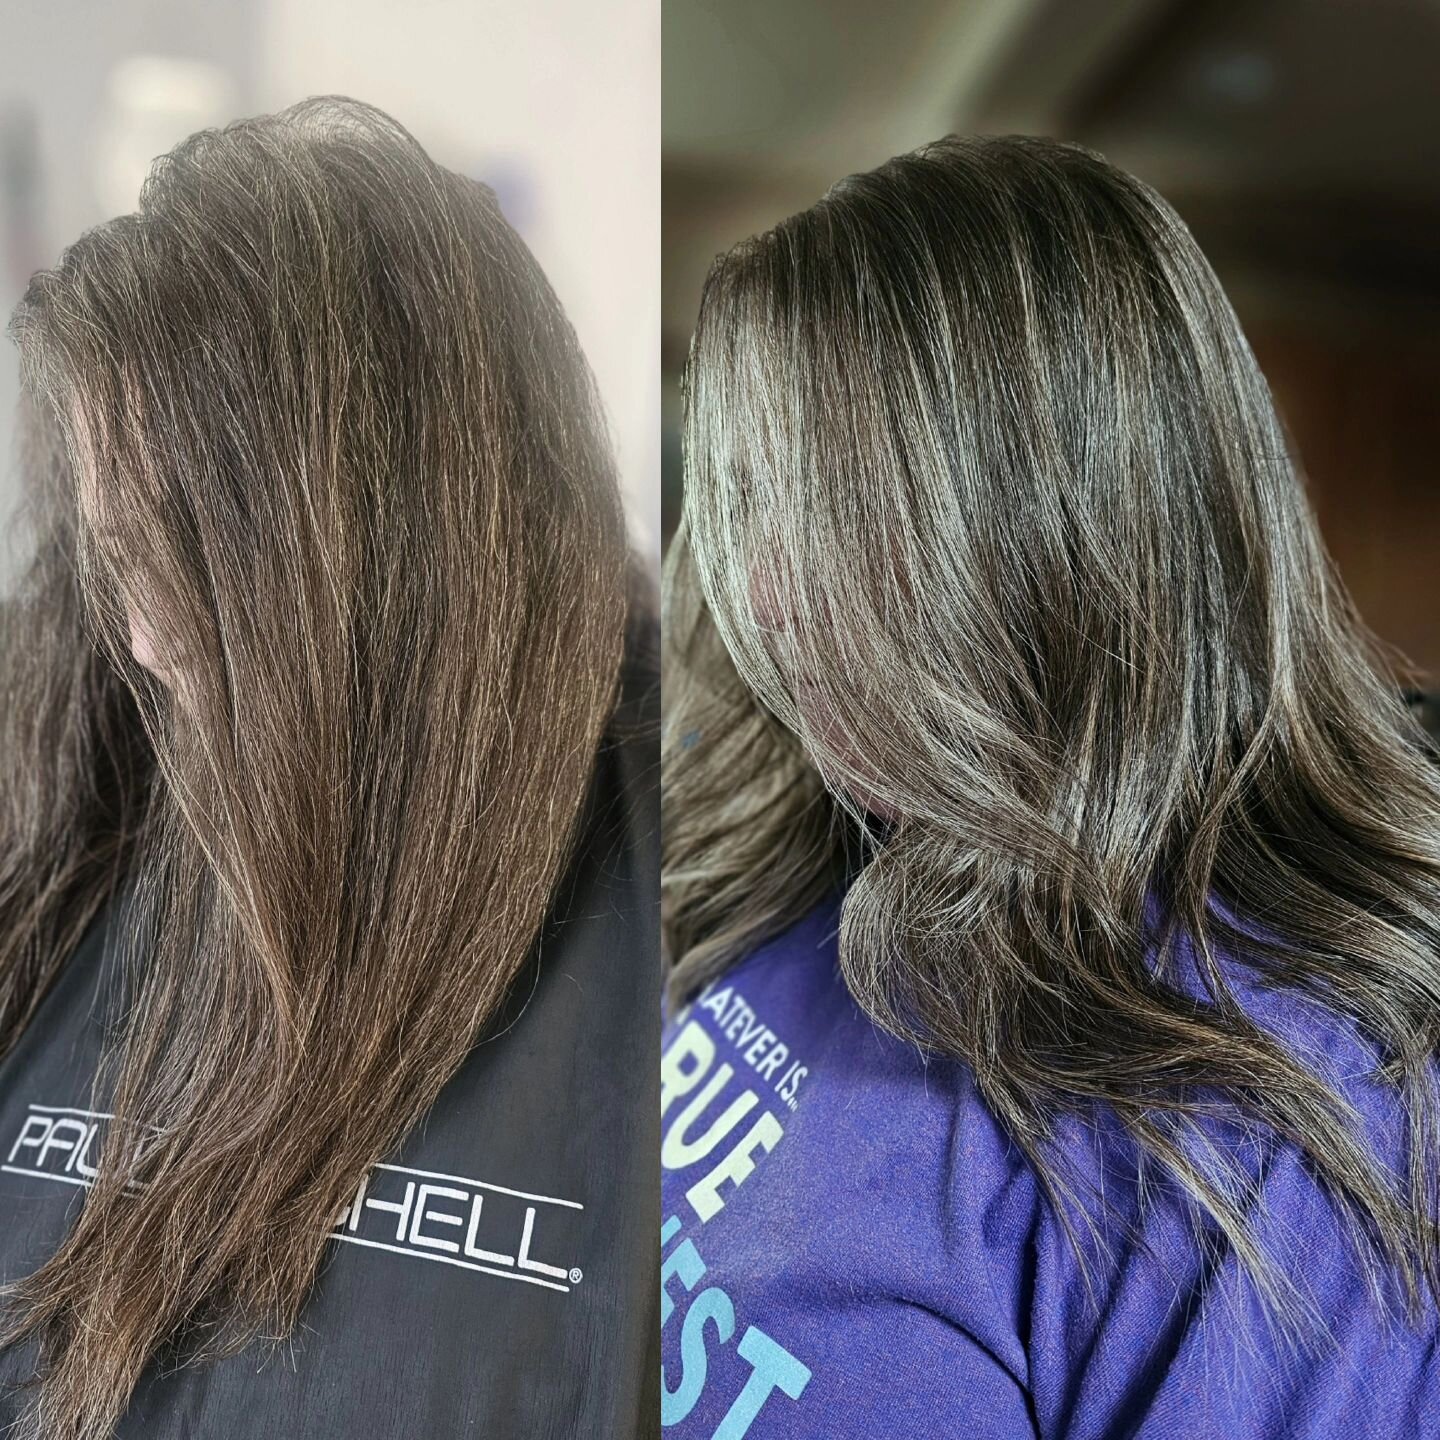 From all angles! Sophisticated and sassy new look! 
Fresh haircut with beautifully blended highlights! 

#transformationwednesday #hair #hairstylist #hairgoals #newhair #homesalon #blended #highlights #wellahaircolor #blondorwella #haircut #colorados